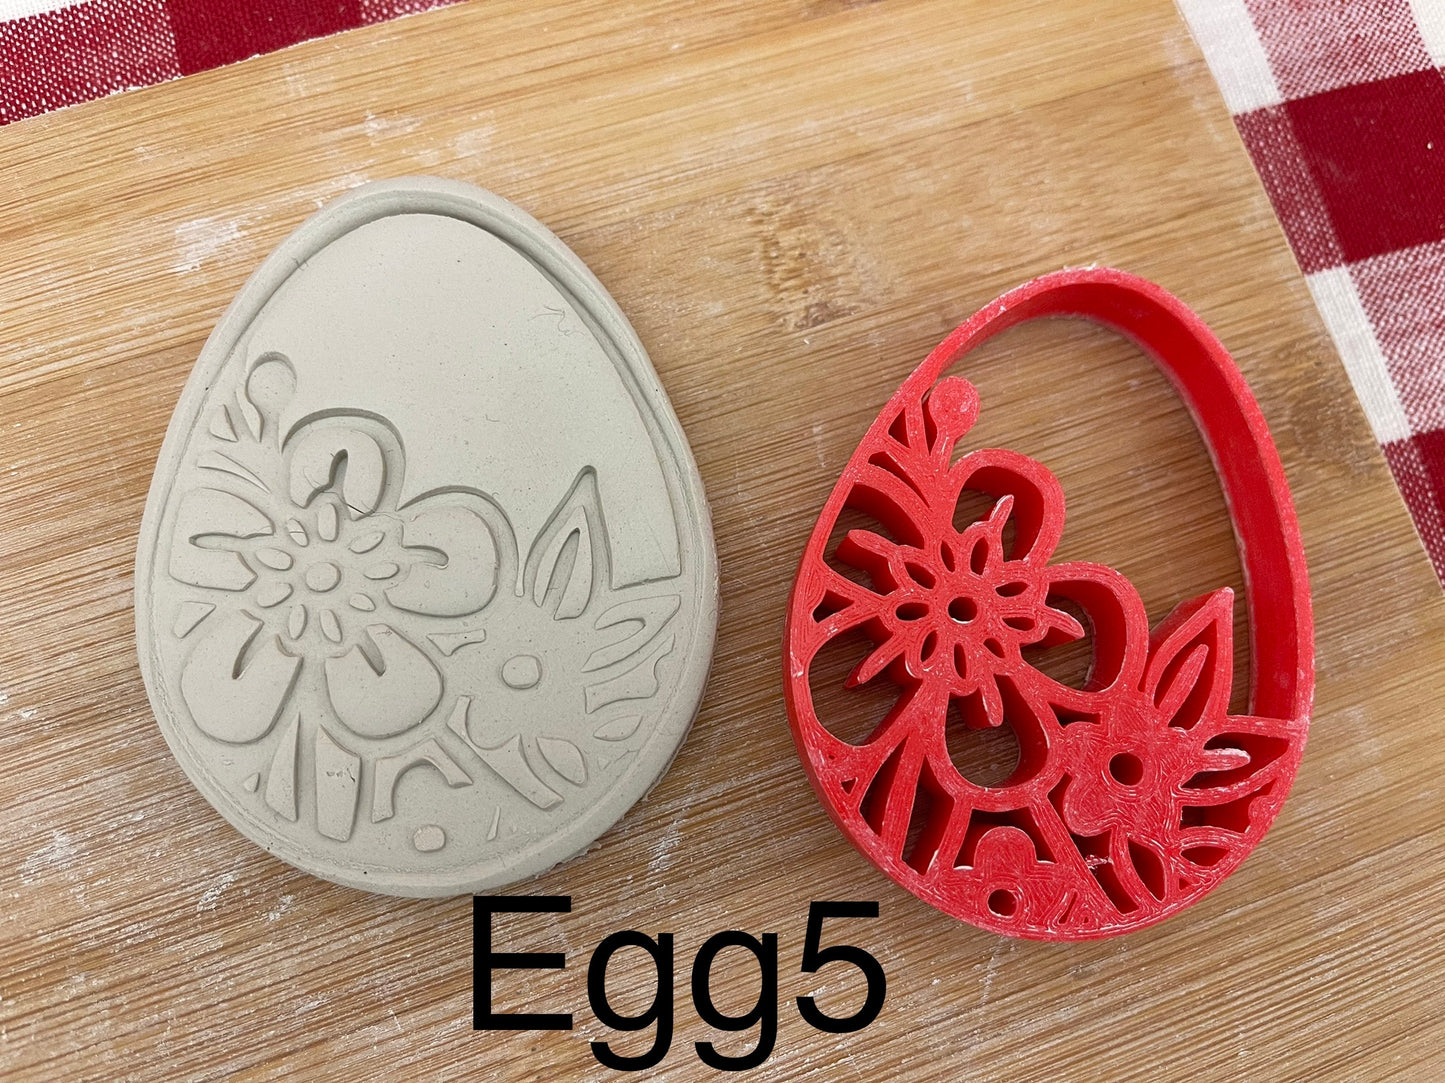 Pottery Stamp, Easter egg designs, with optional cookie cutter ornament - multiple sizes